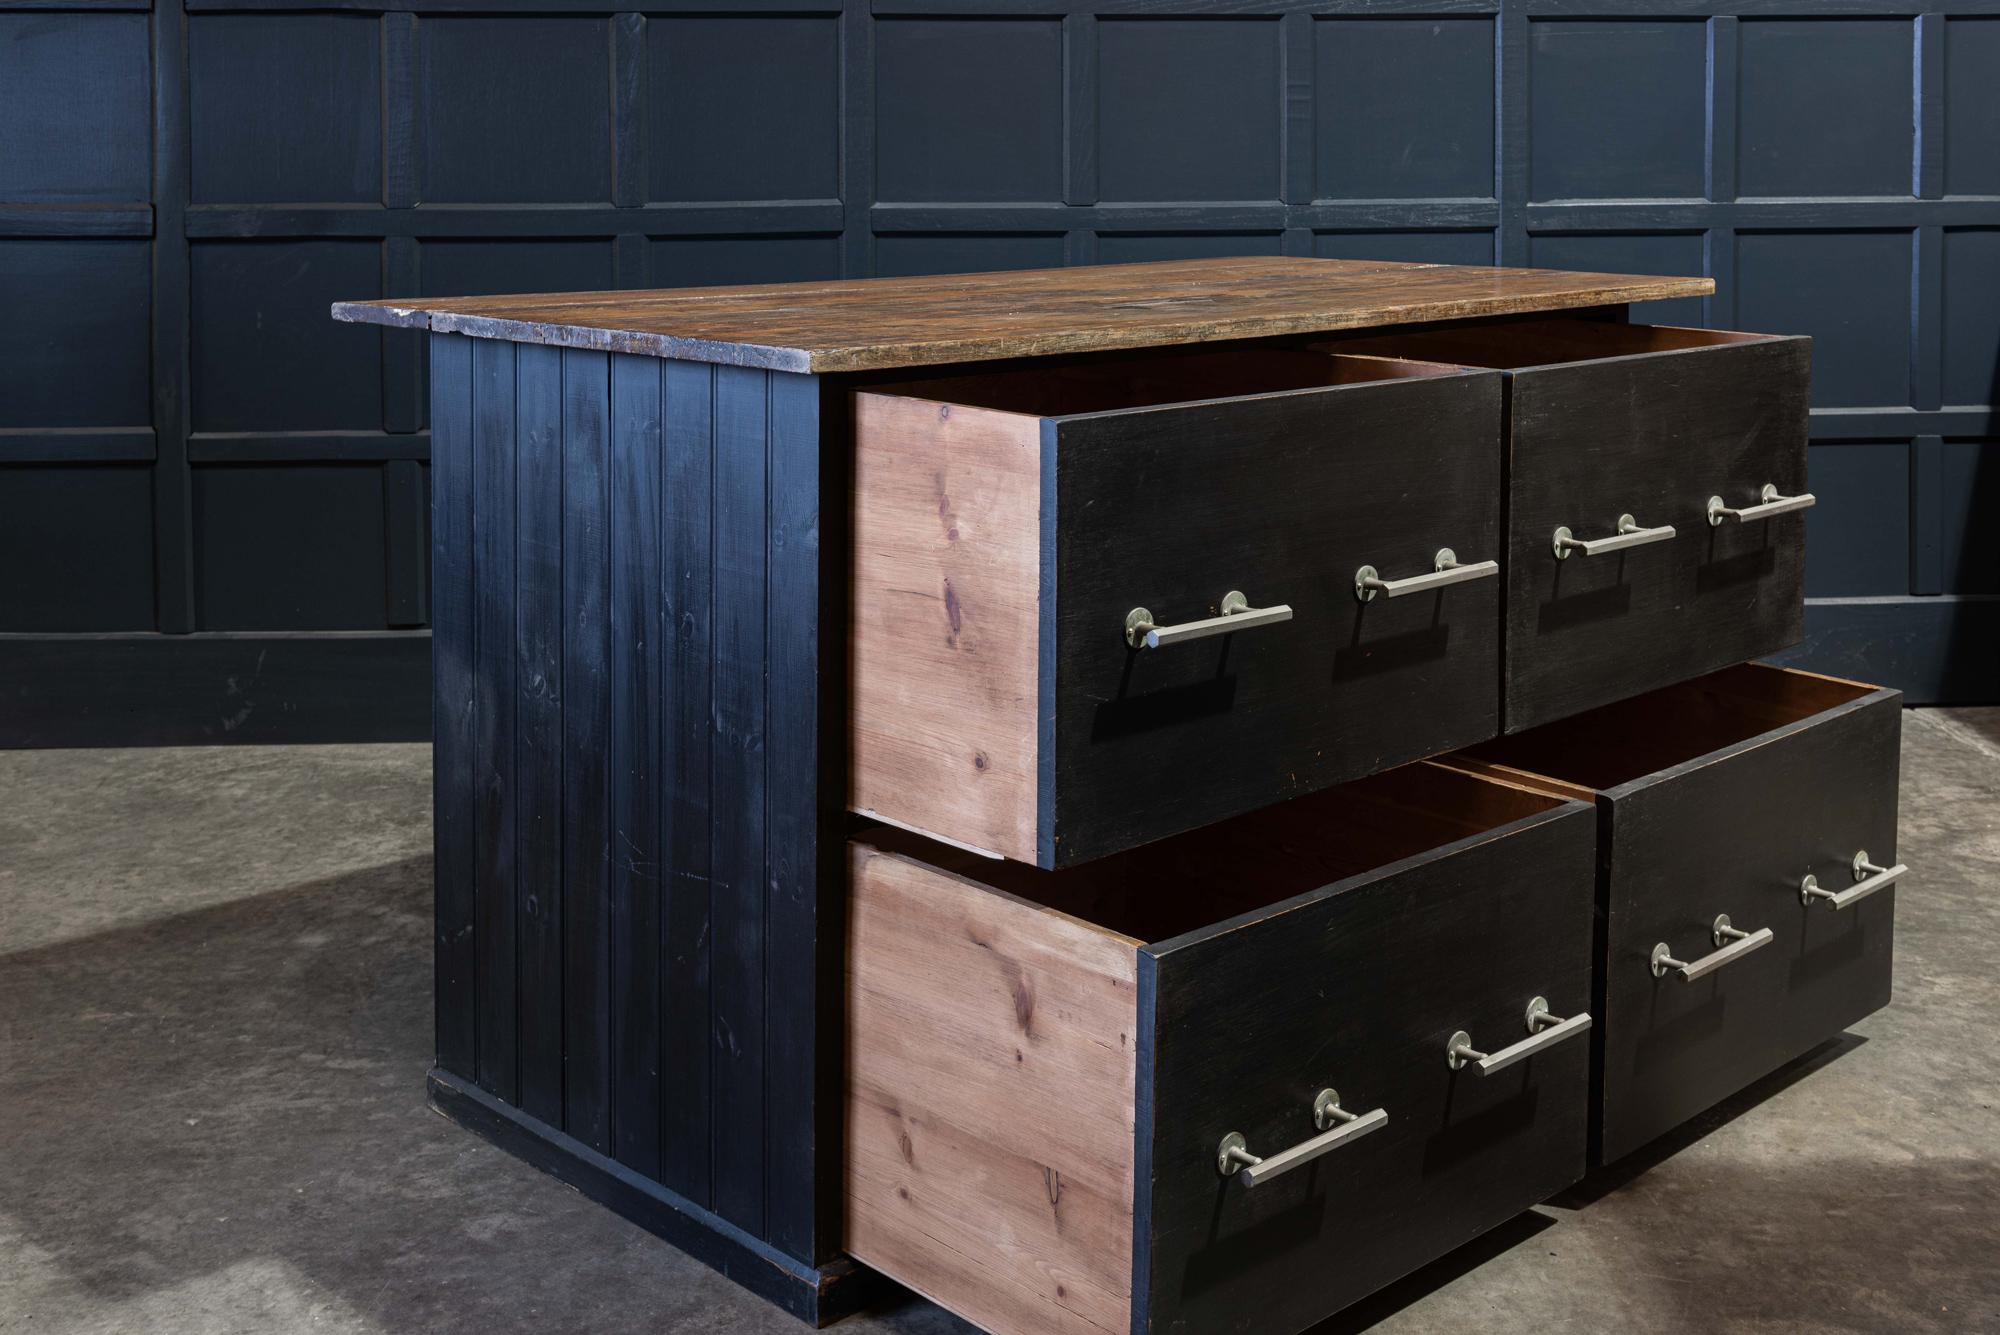 English ebonized hat shop counter kitchen island
circa 1930.

Original shop counter sourced from a hat shop in Cheshire.
4 large deep drawers with original bar handles, solid teak worktop with generous overhang, lovely wear and colour. Would be